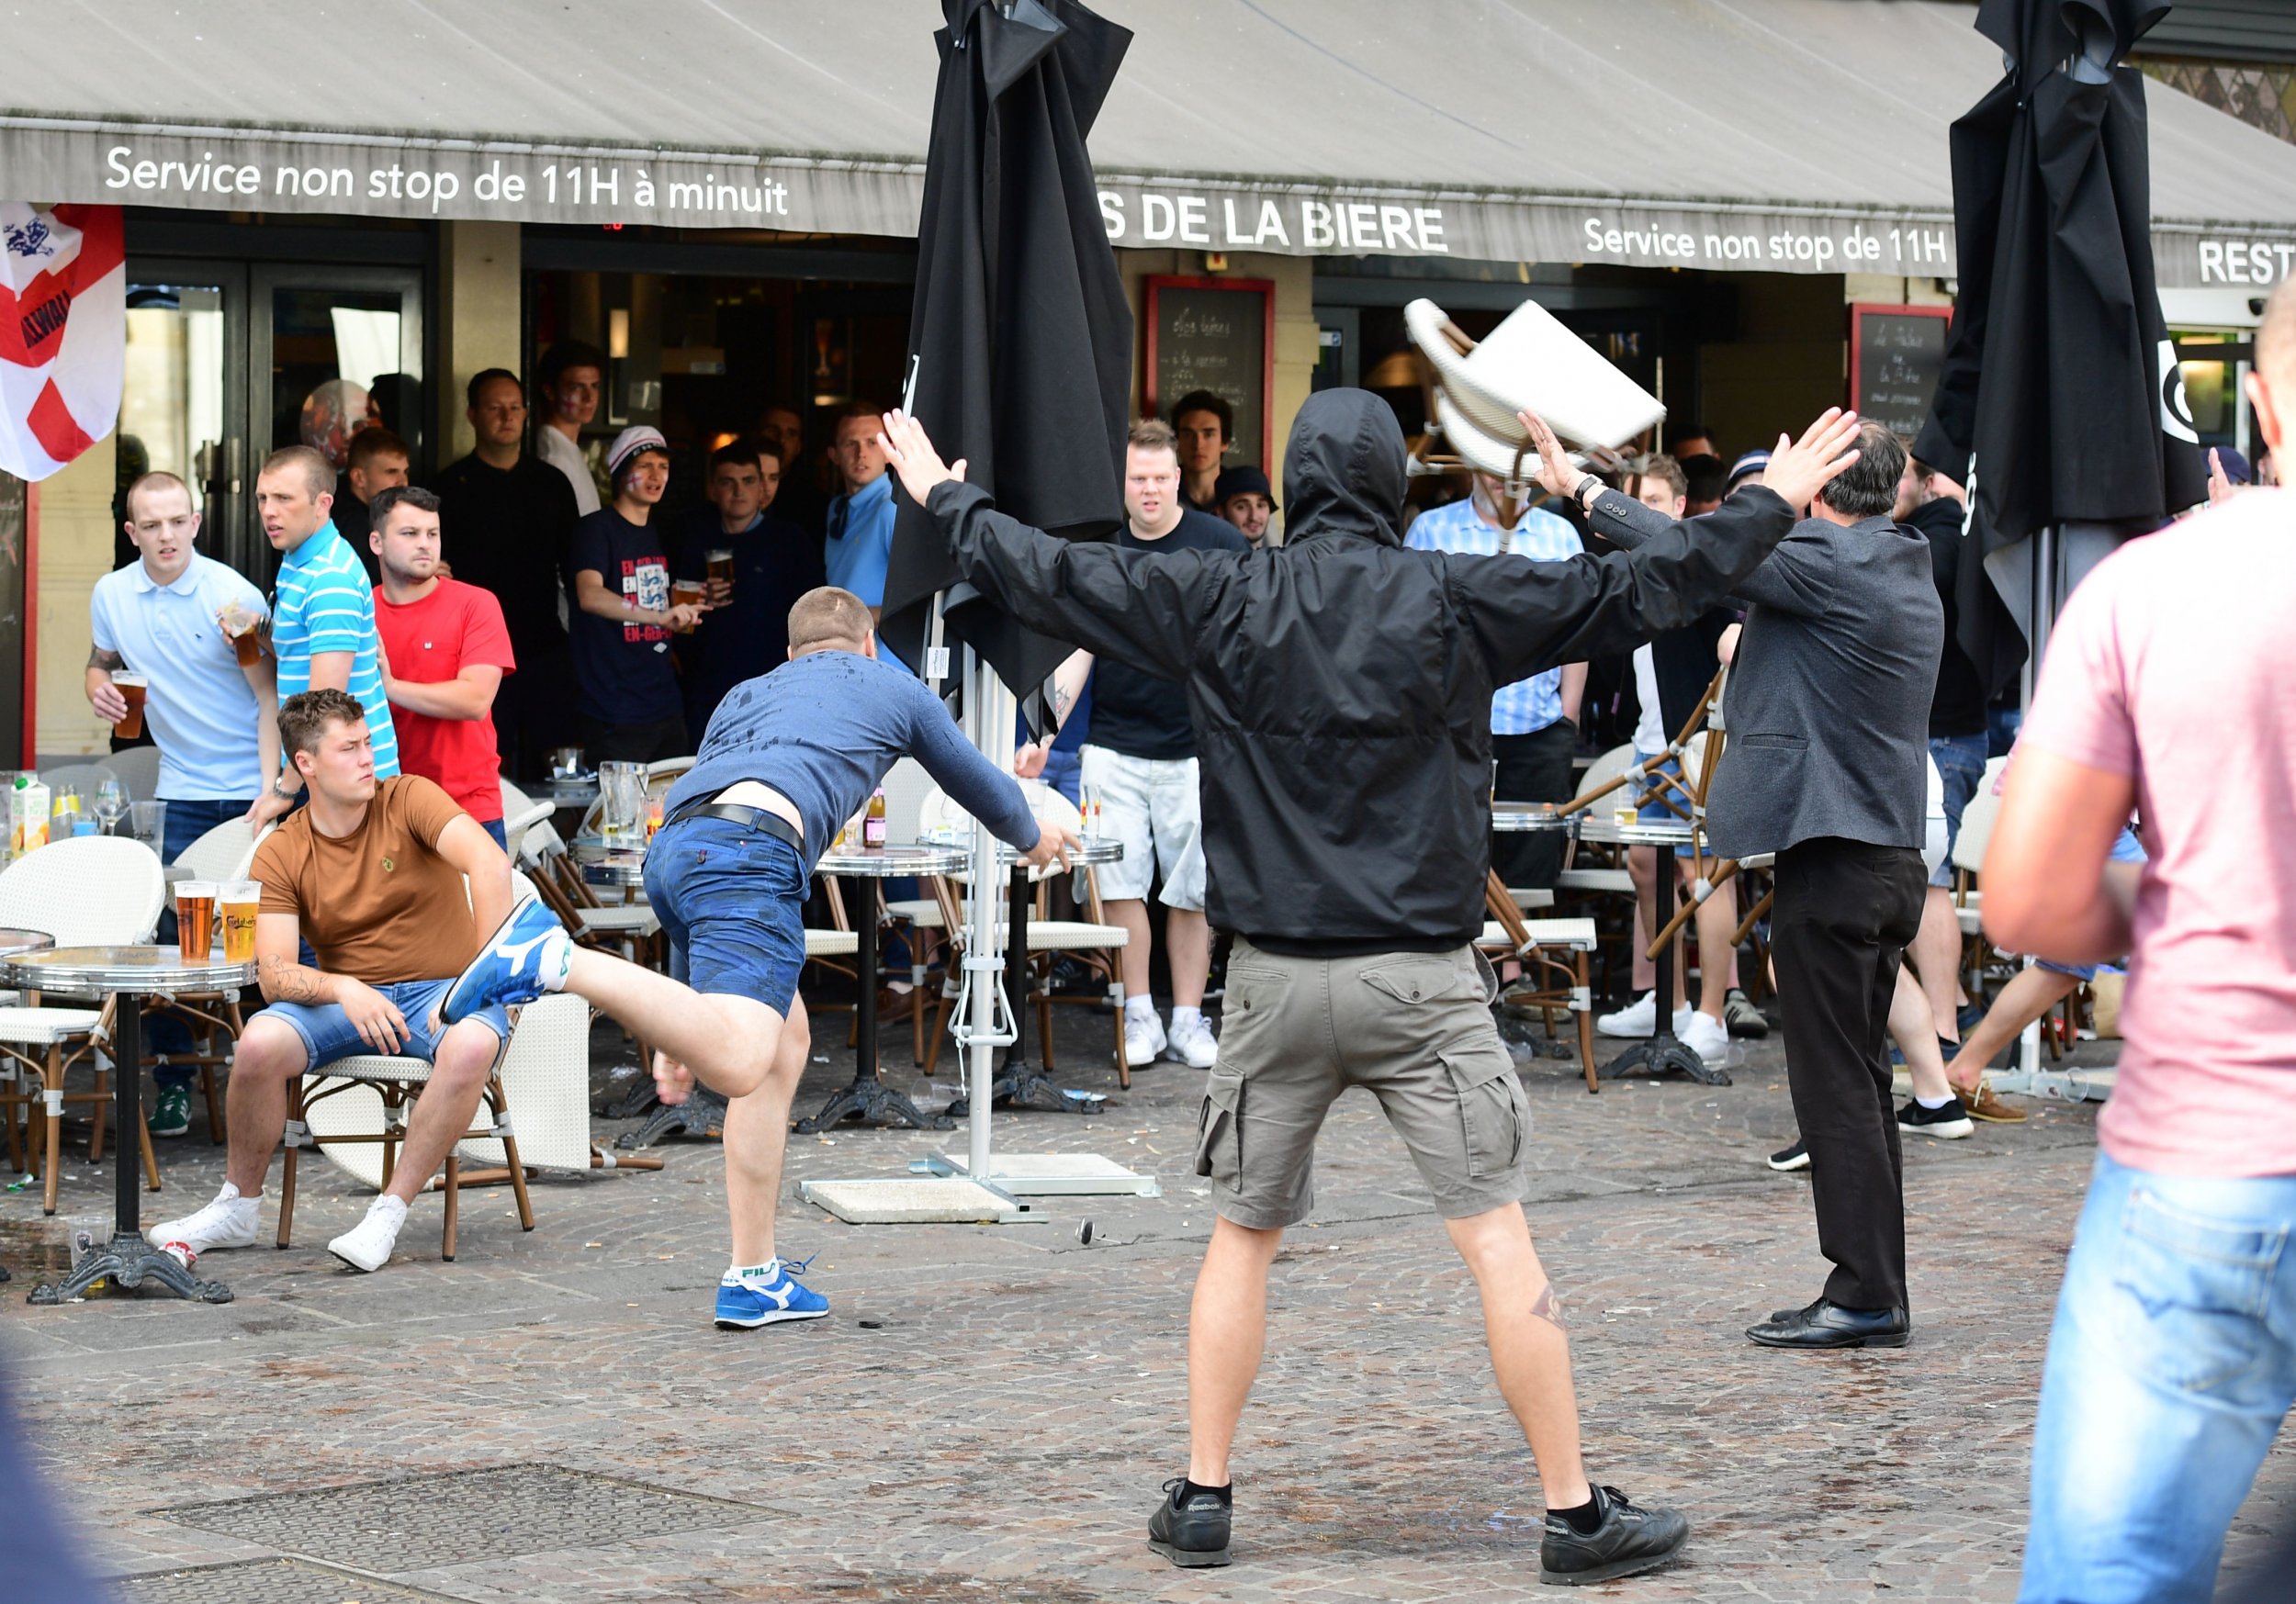 A Russia football supporter lobs a chair towards England fans sitting in a cafe in the northern city of Lille on June 14, 2016..